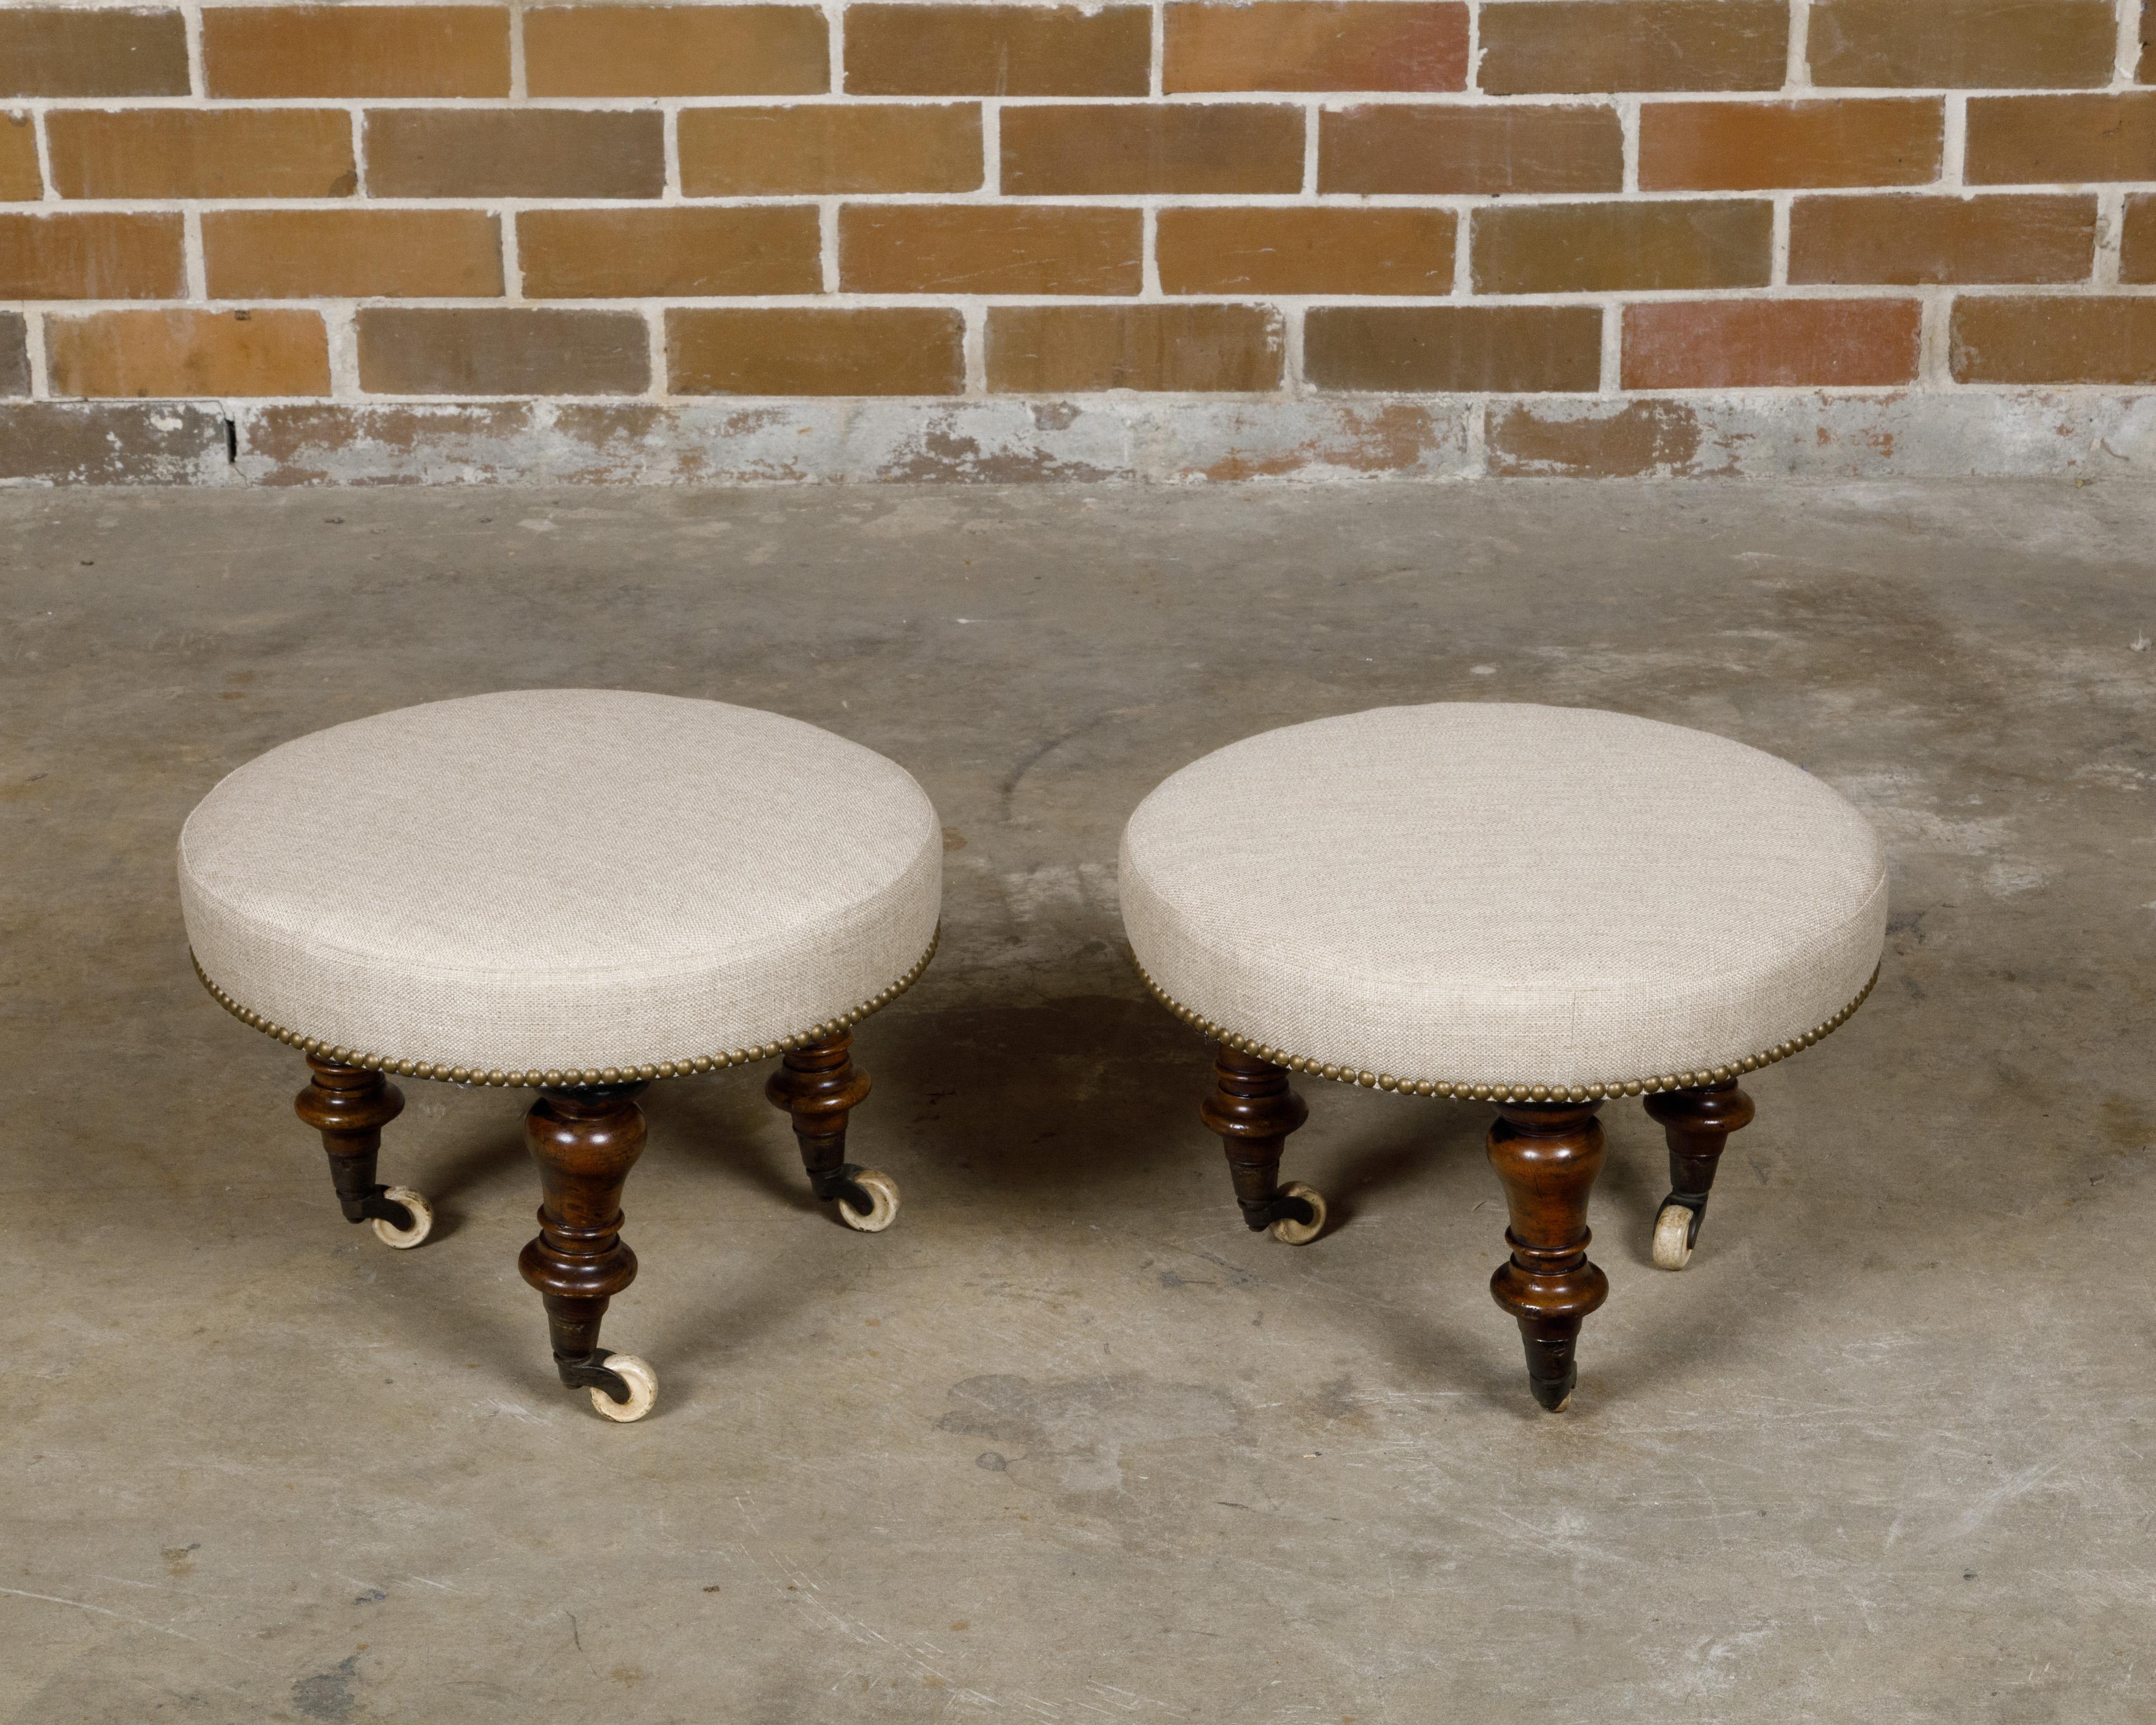 Pair of English Mahogany Stools with 19th Century Turned Legs on Casters For Sale 6